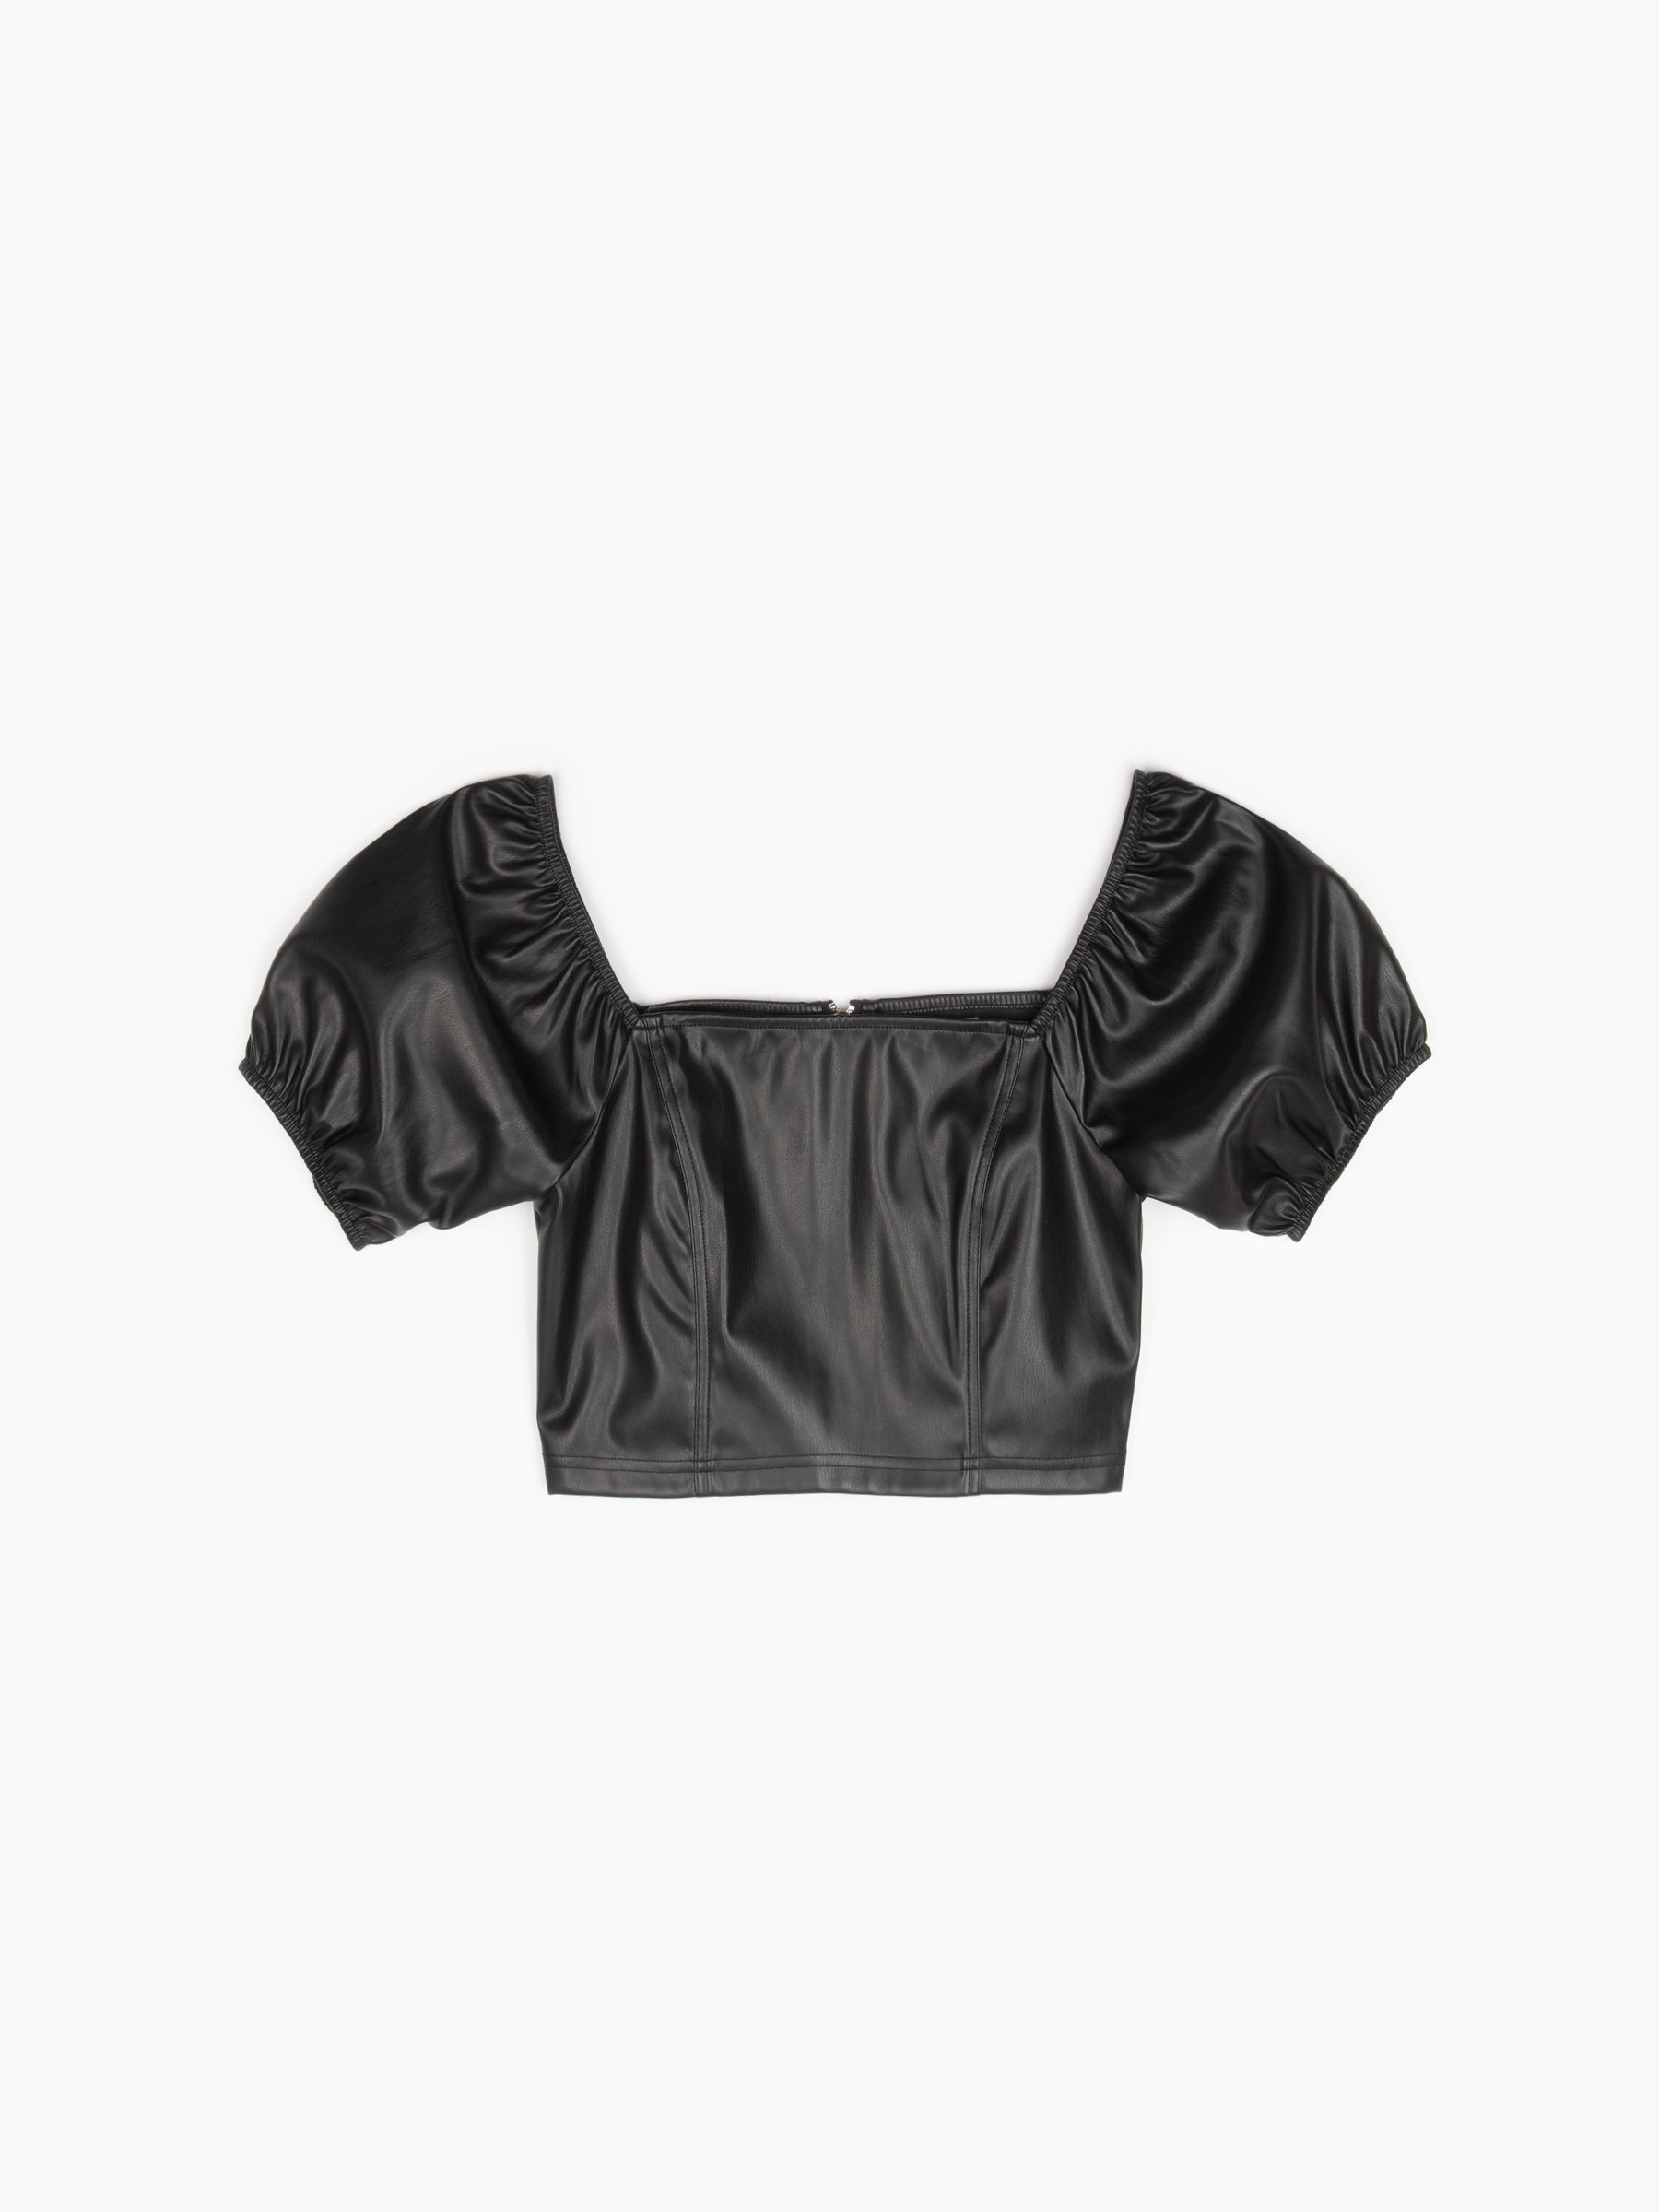 Faux Leather Crop Top Gate, White Faux Leather Top